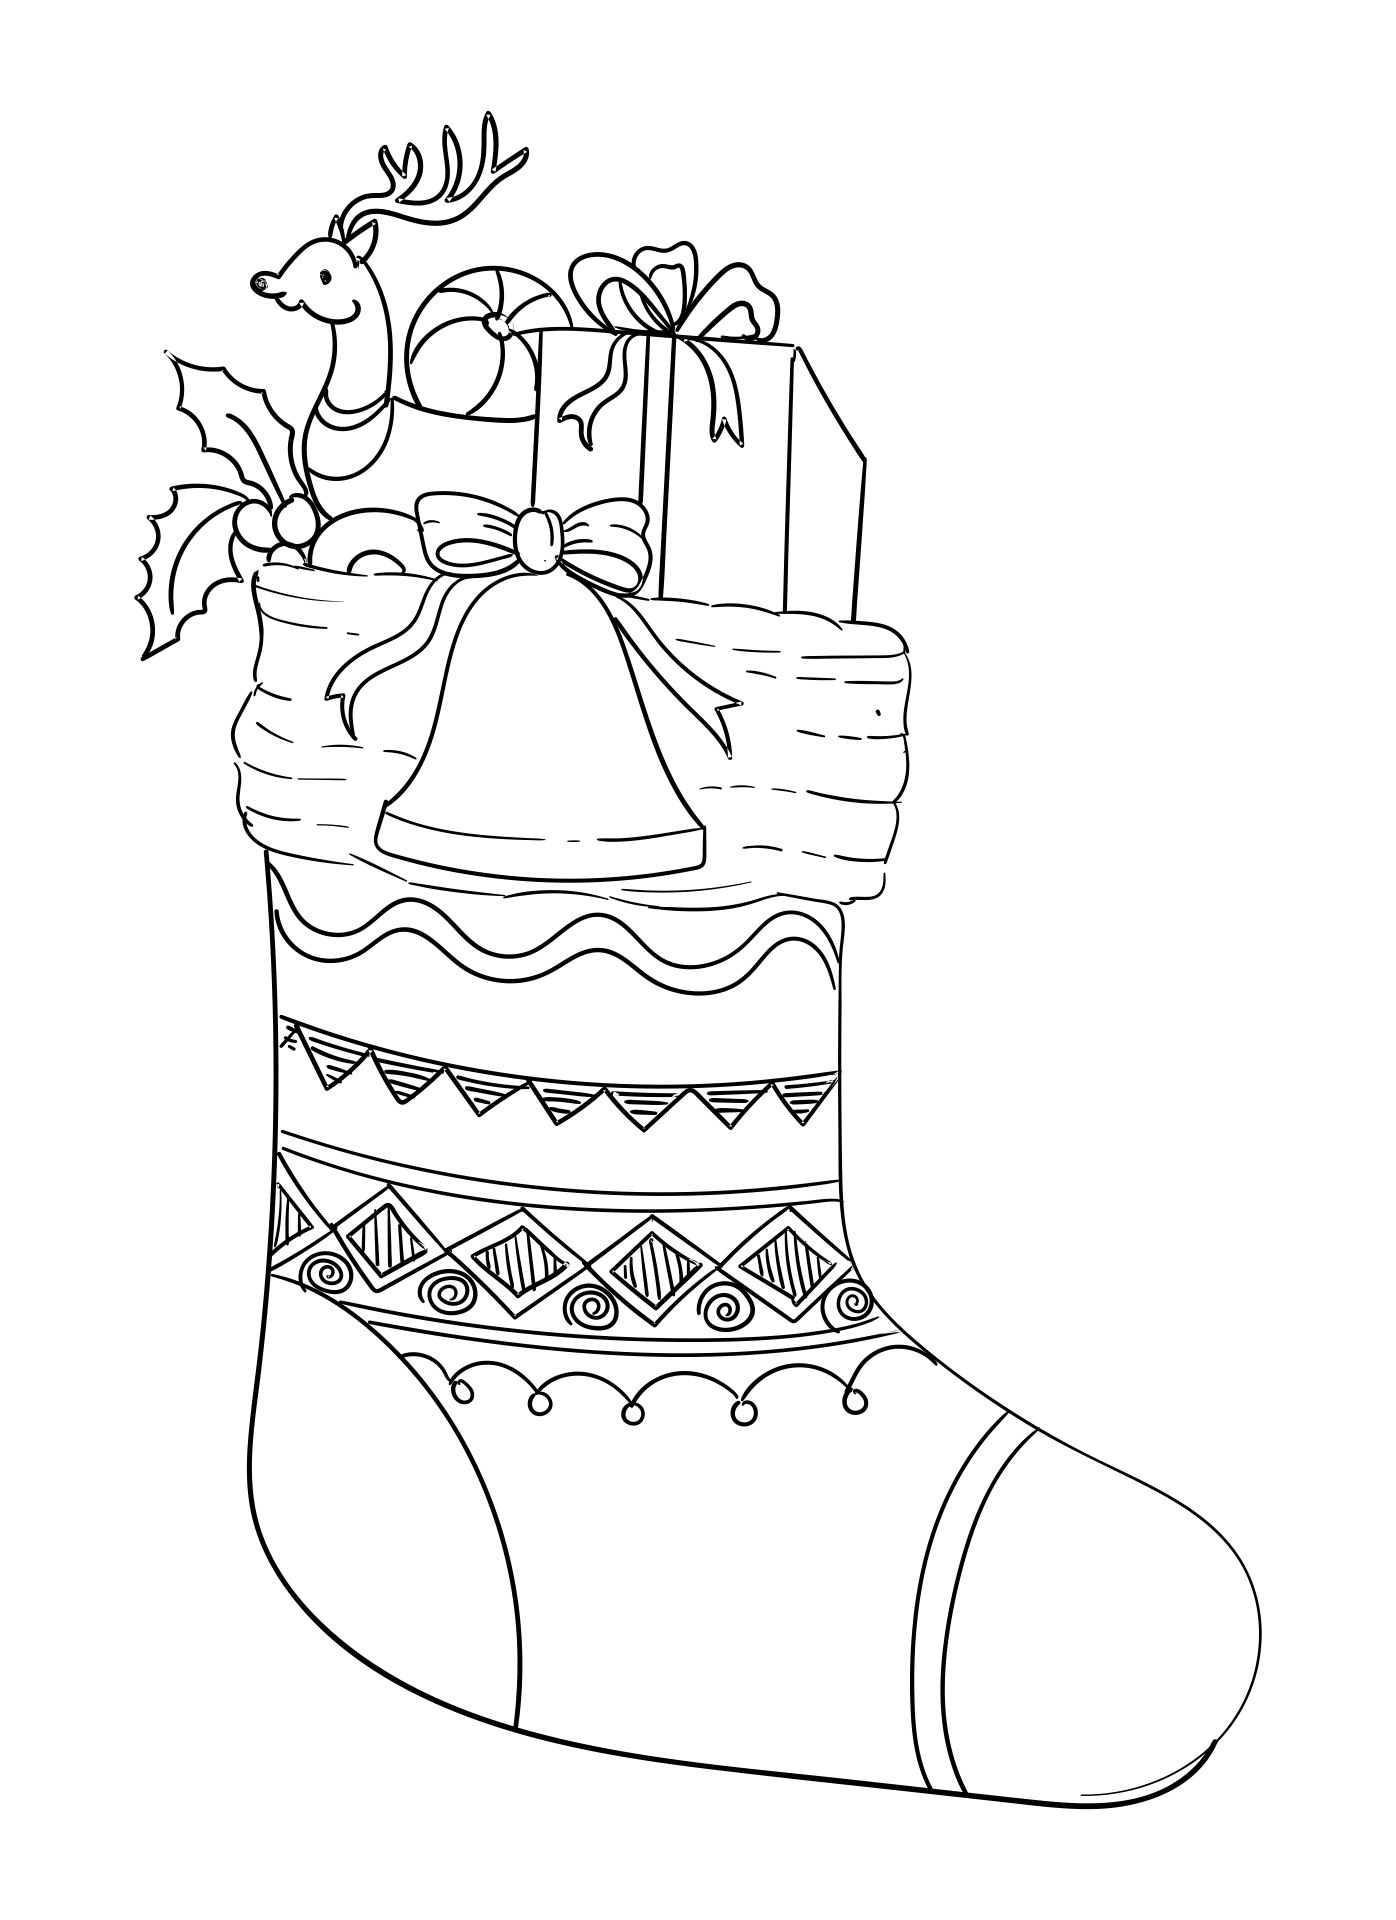 Tribal Decorated Christmas Stockings Coloring Pages